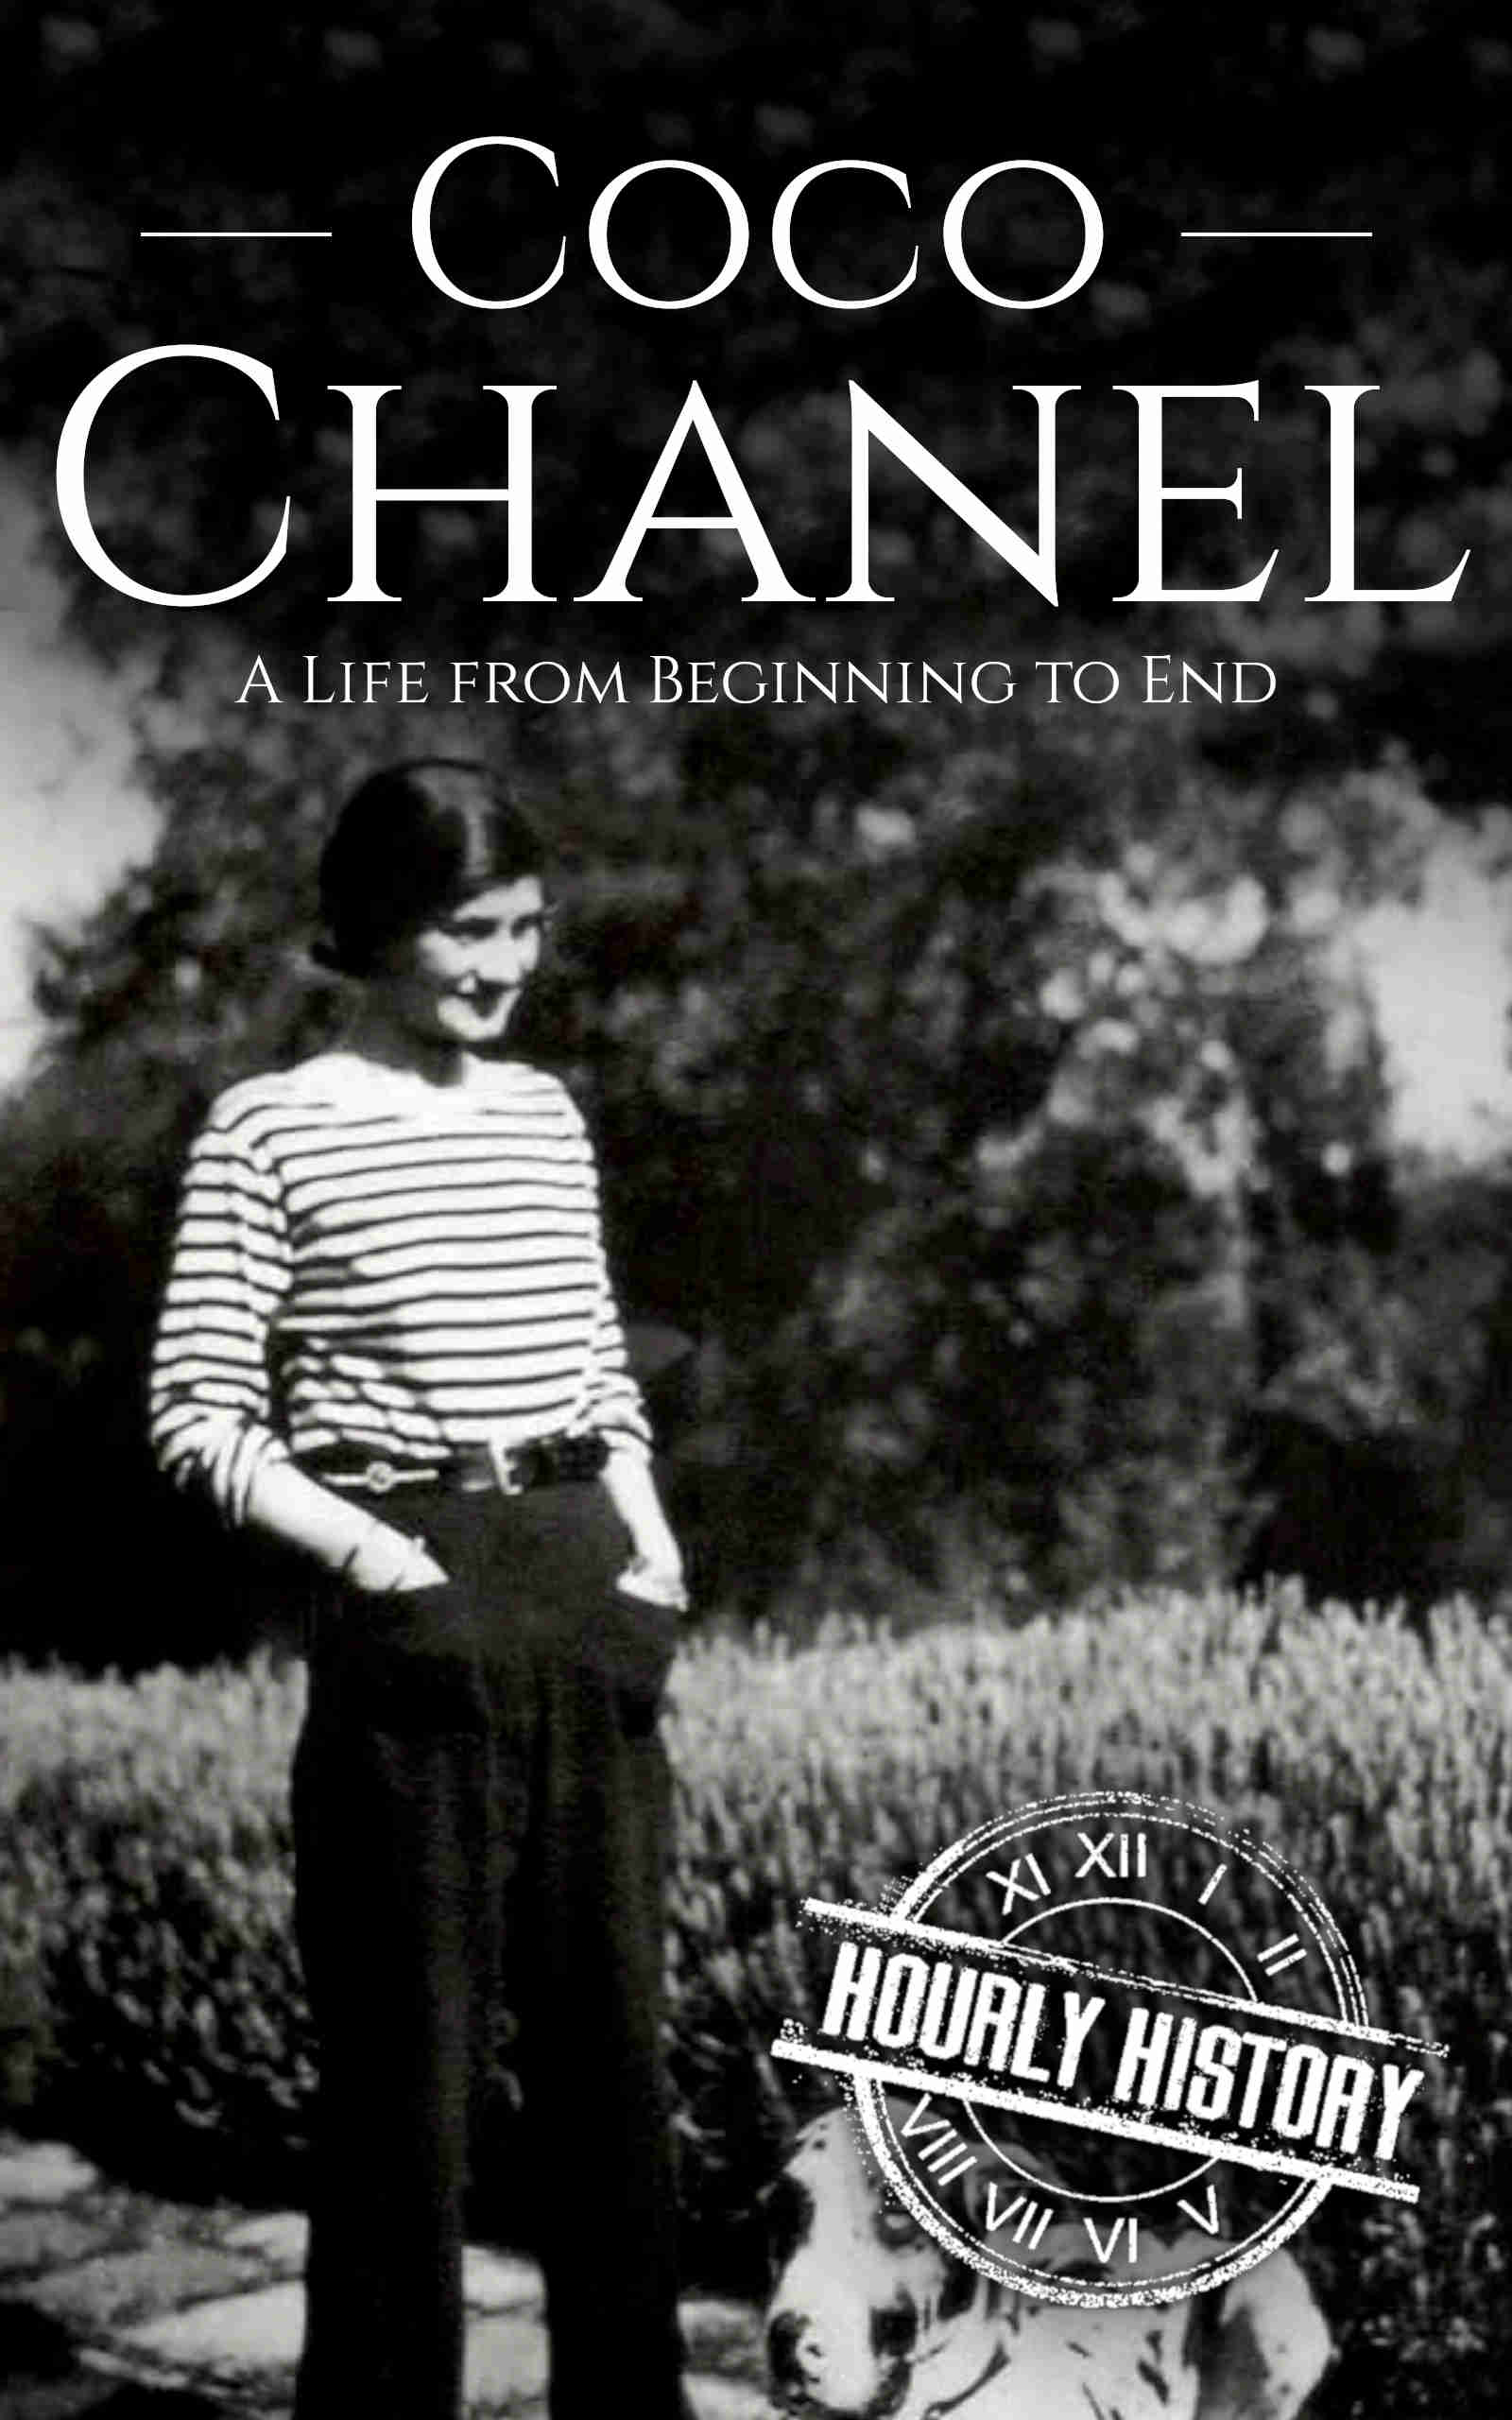 short biography of coco chanel